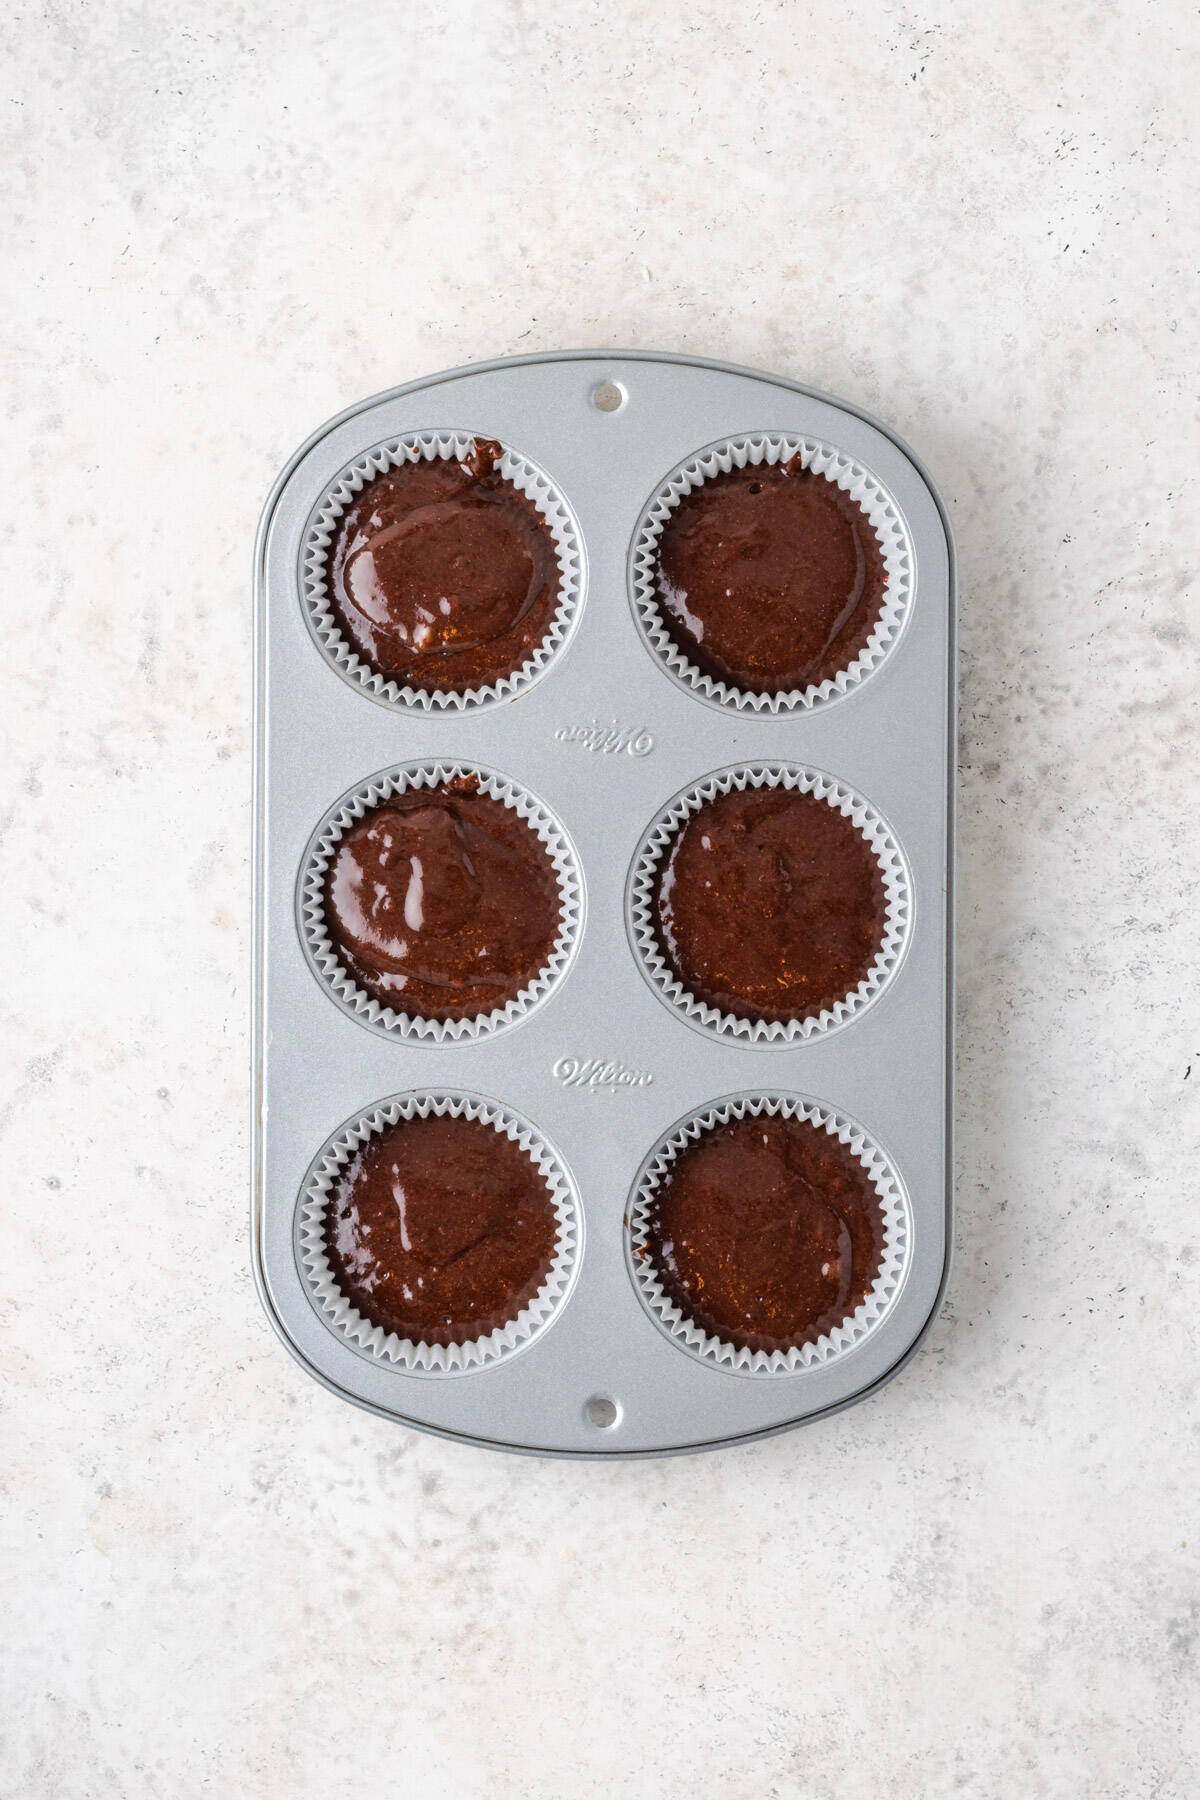 A muffin tin lined with paper cups and filled with chocolate cupcake batter.